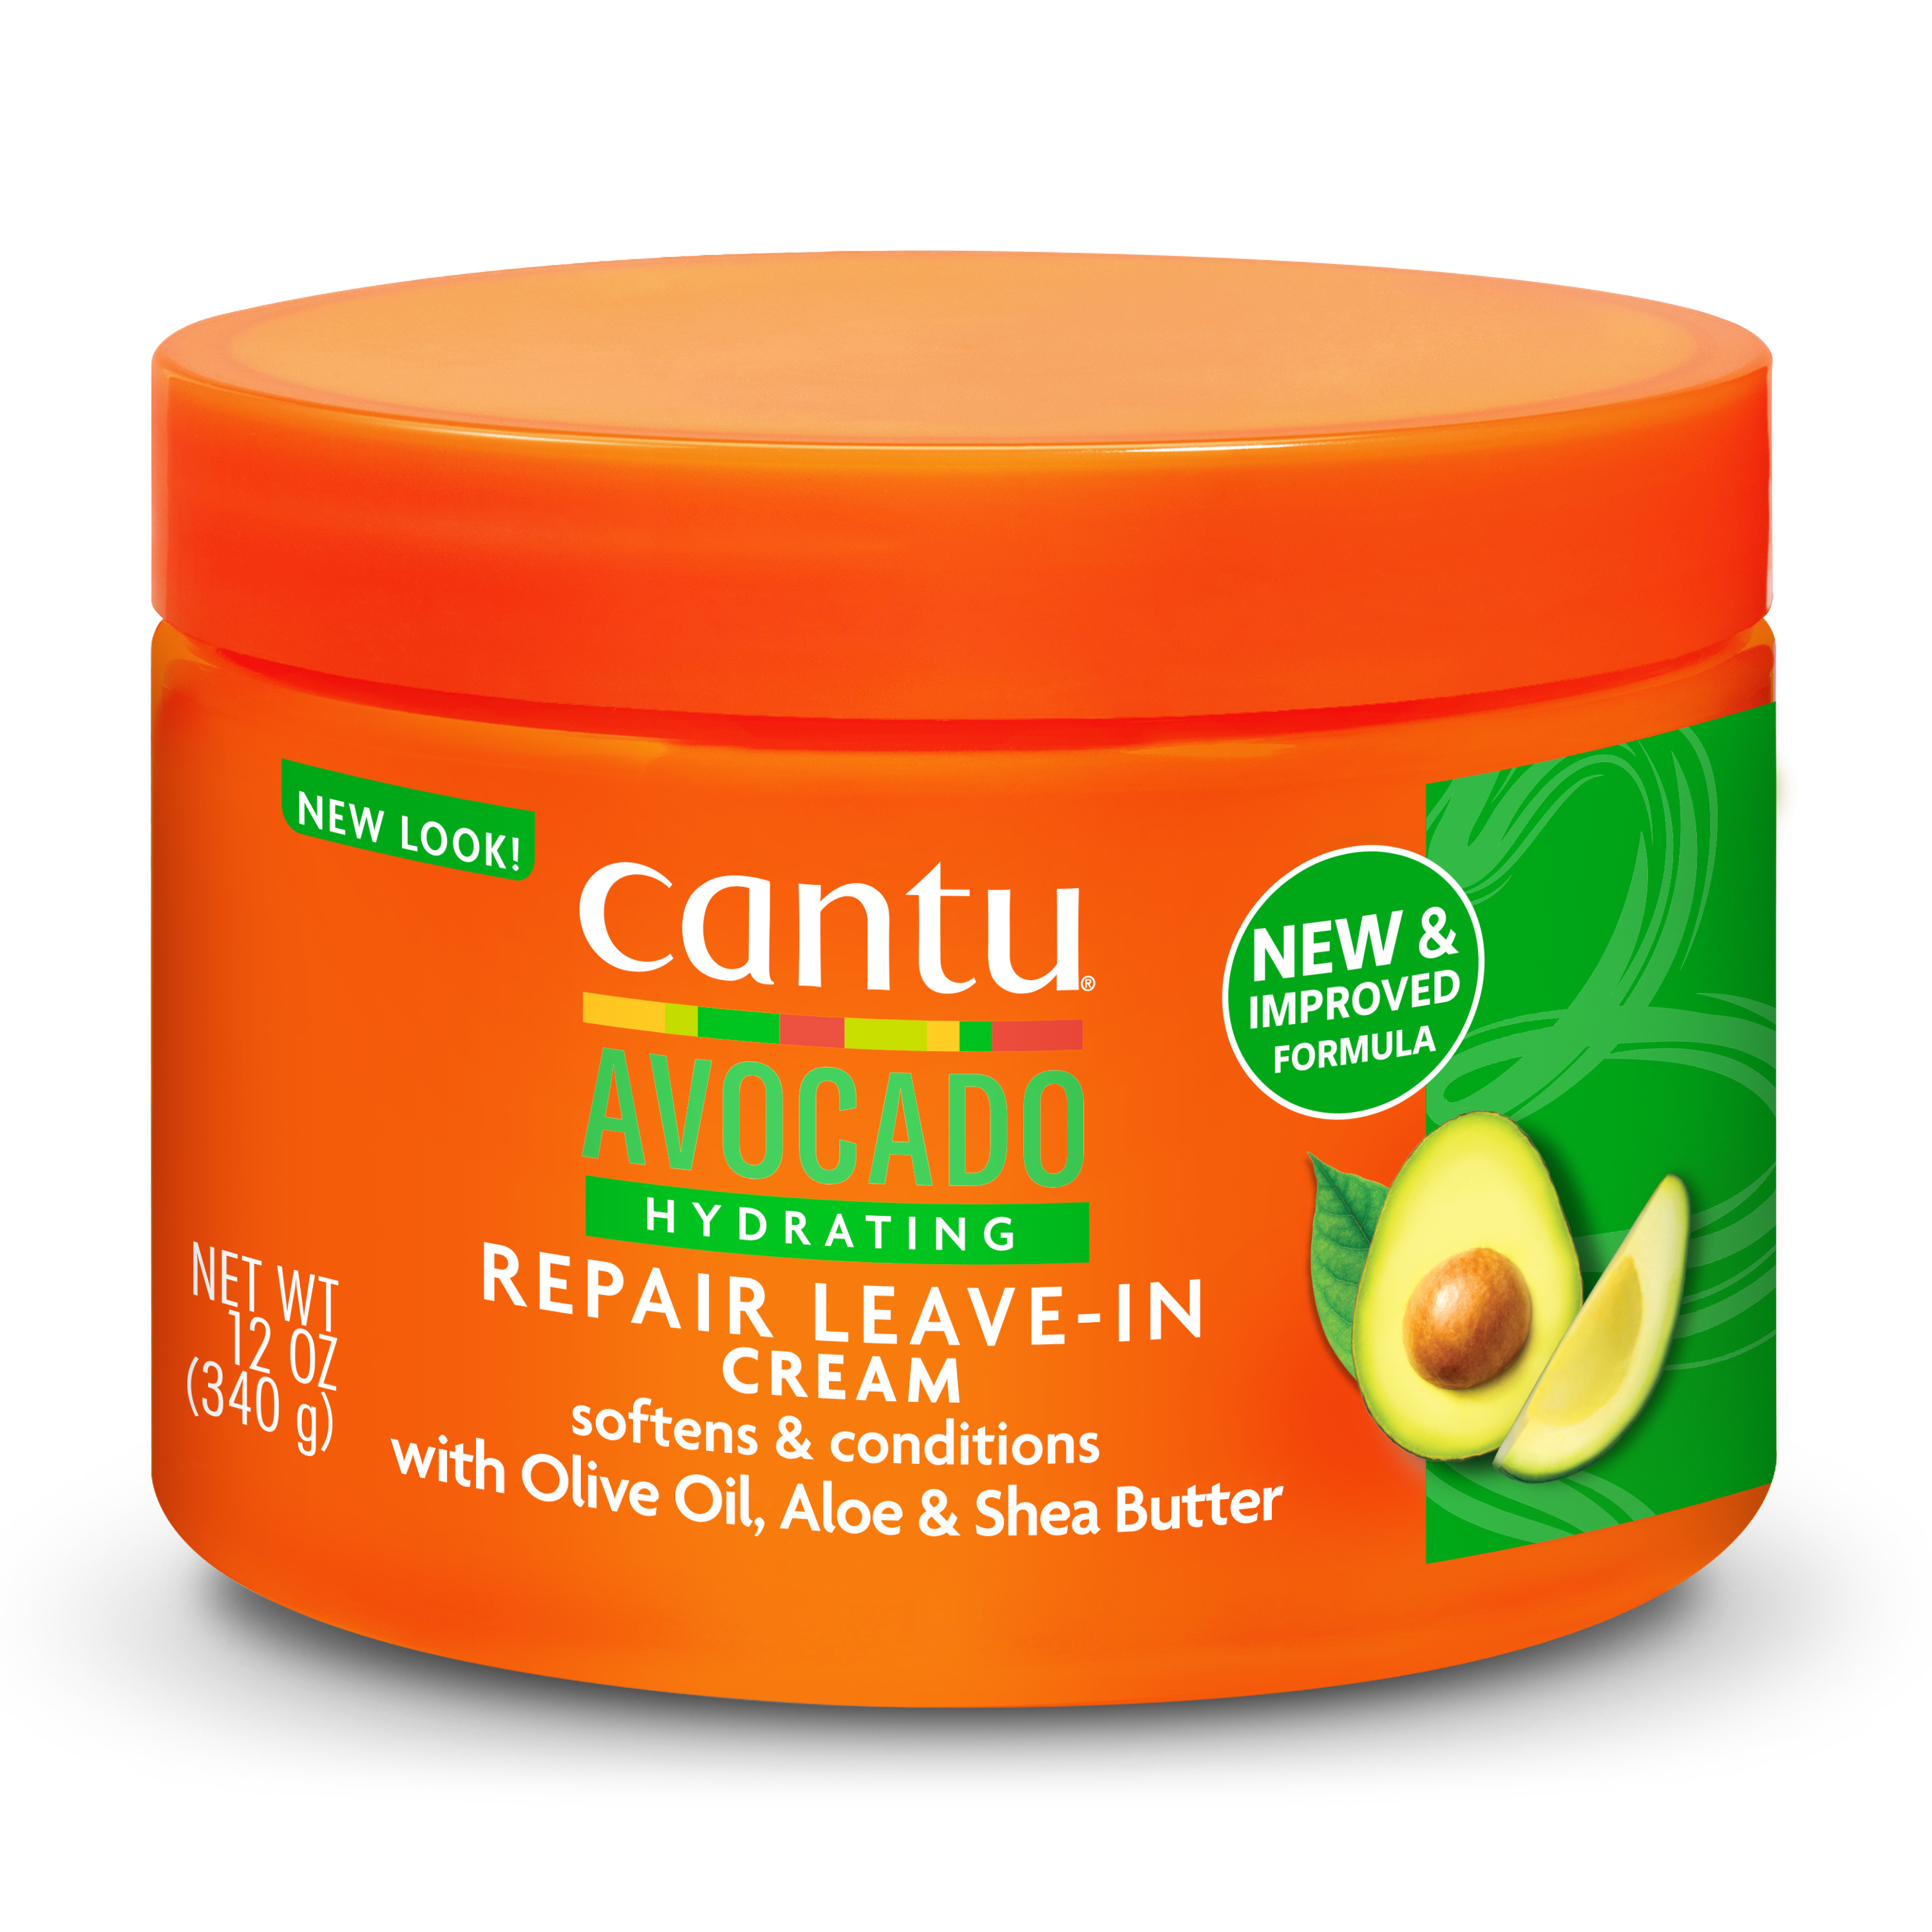 Cantu Avocado Hydrating Leave-in Conditioning Cream with Olive Oil, Aloe, and Shea Butter, 12 oz - image 1 of 10